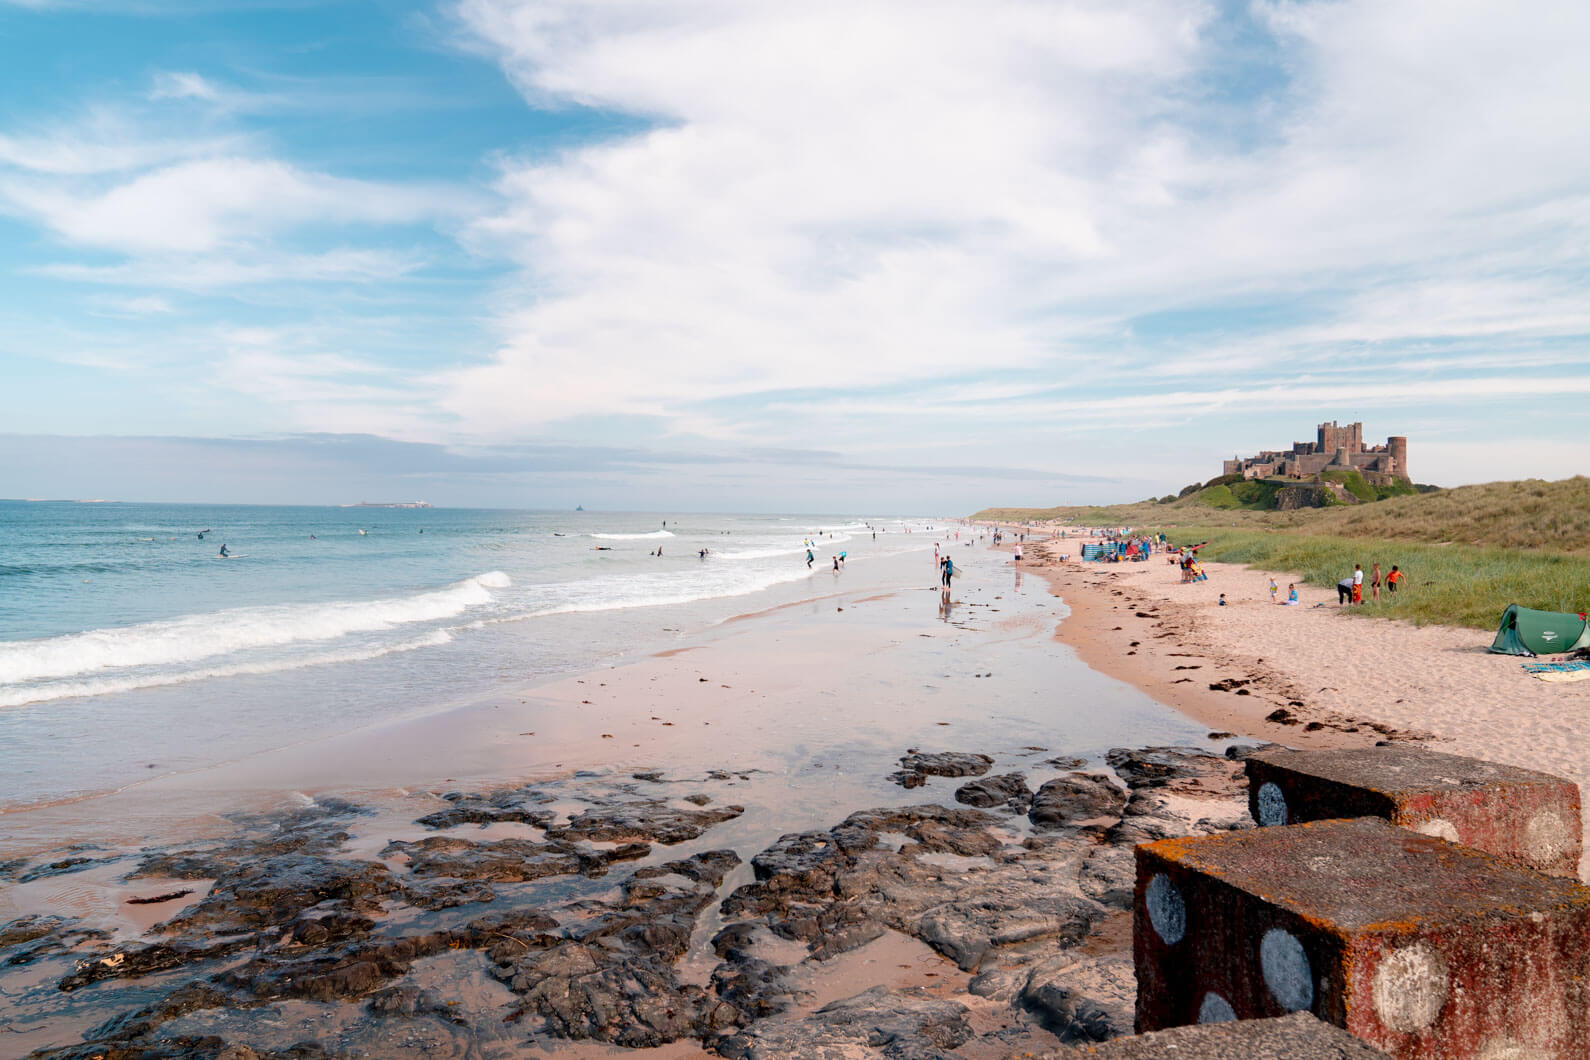 A complete guide to the Northumberland Coast AONB